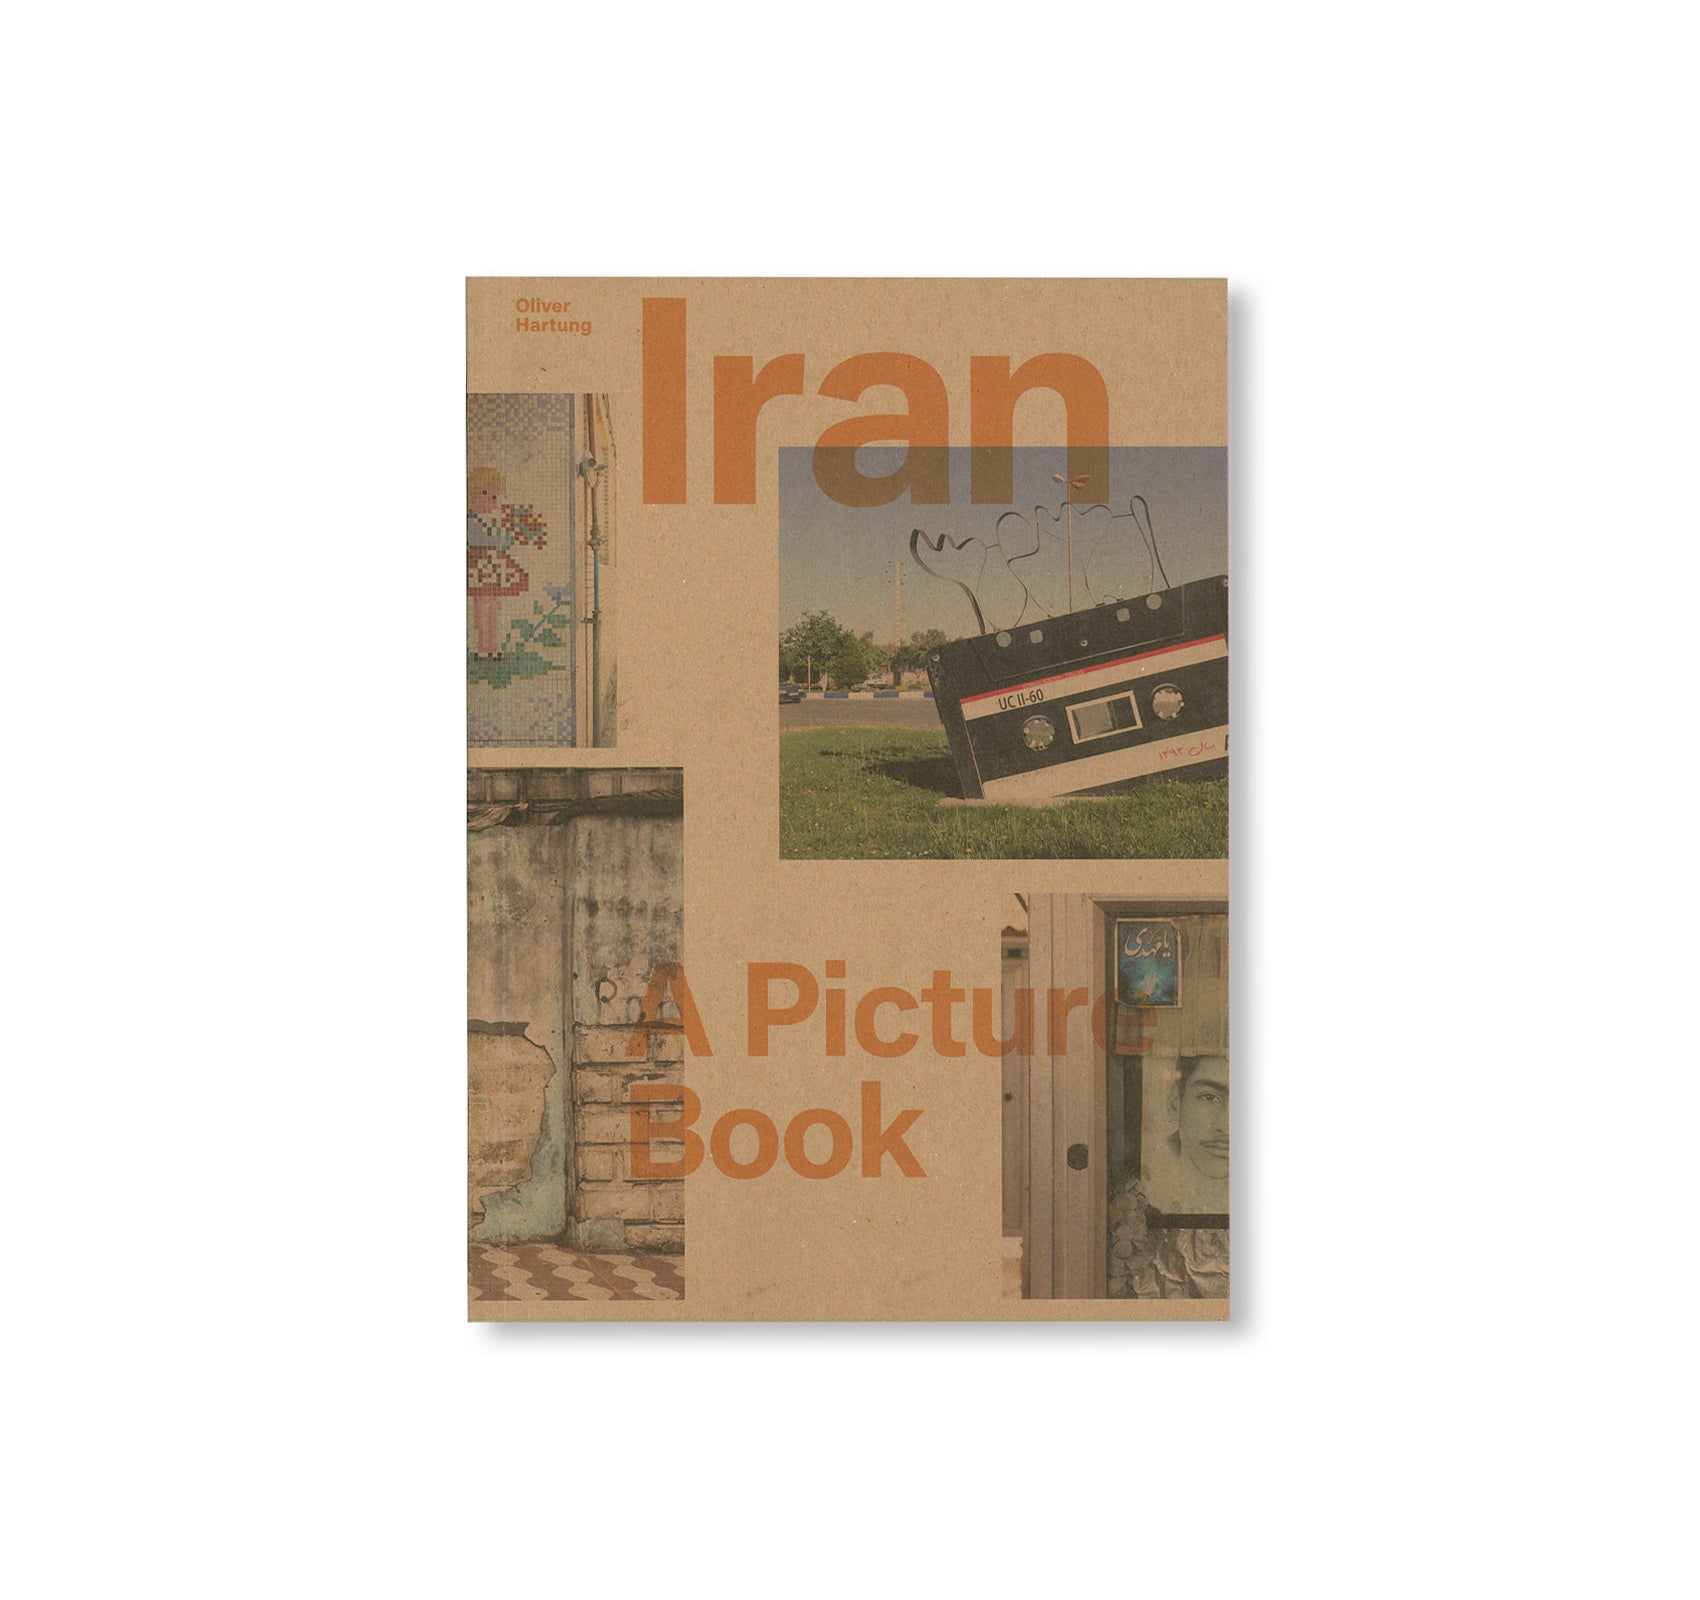 IRAN / A PICTURE BOOK by Oliver Hartung